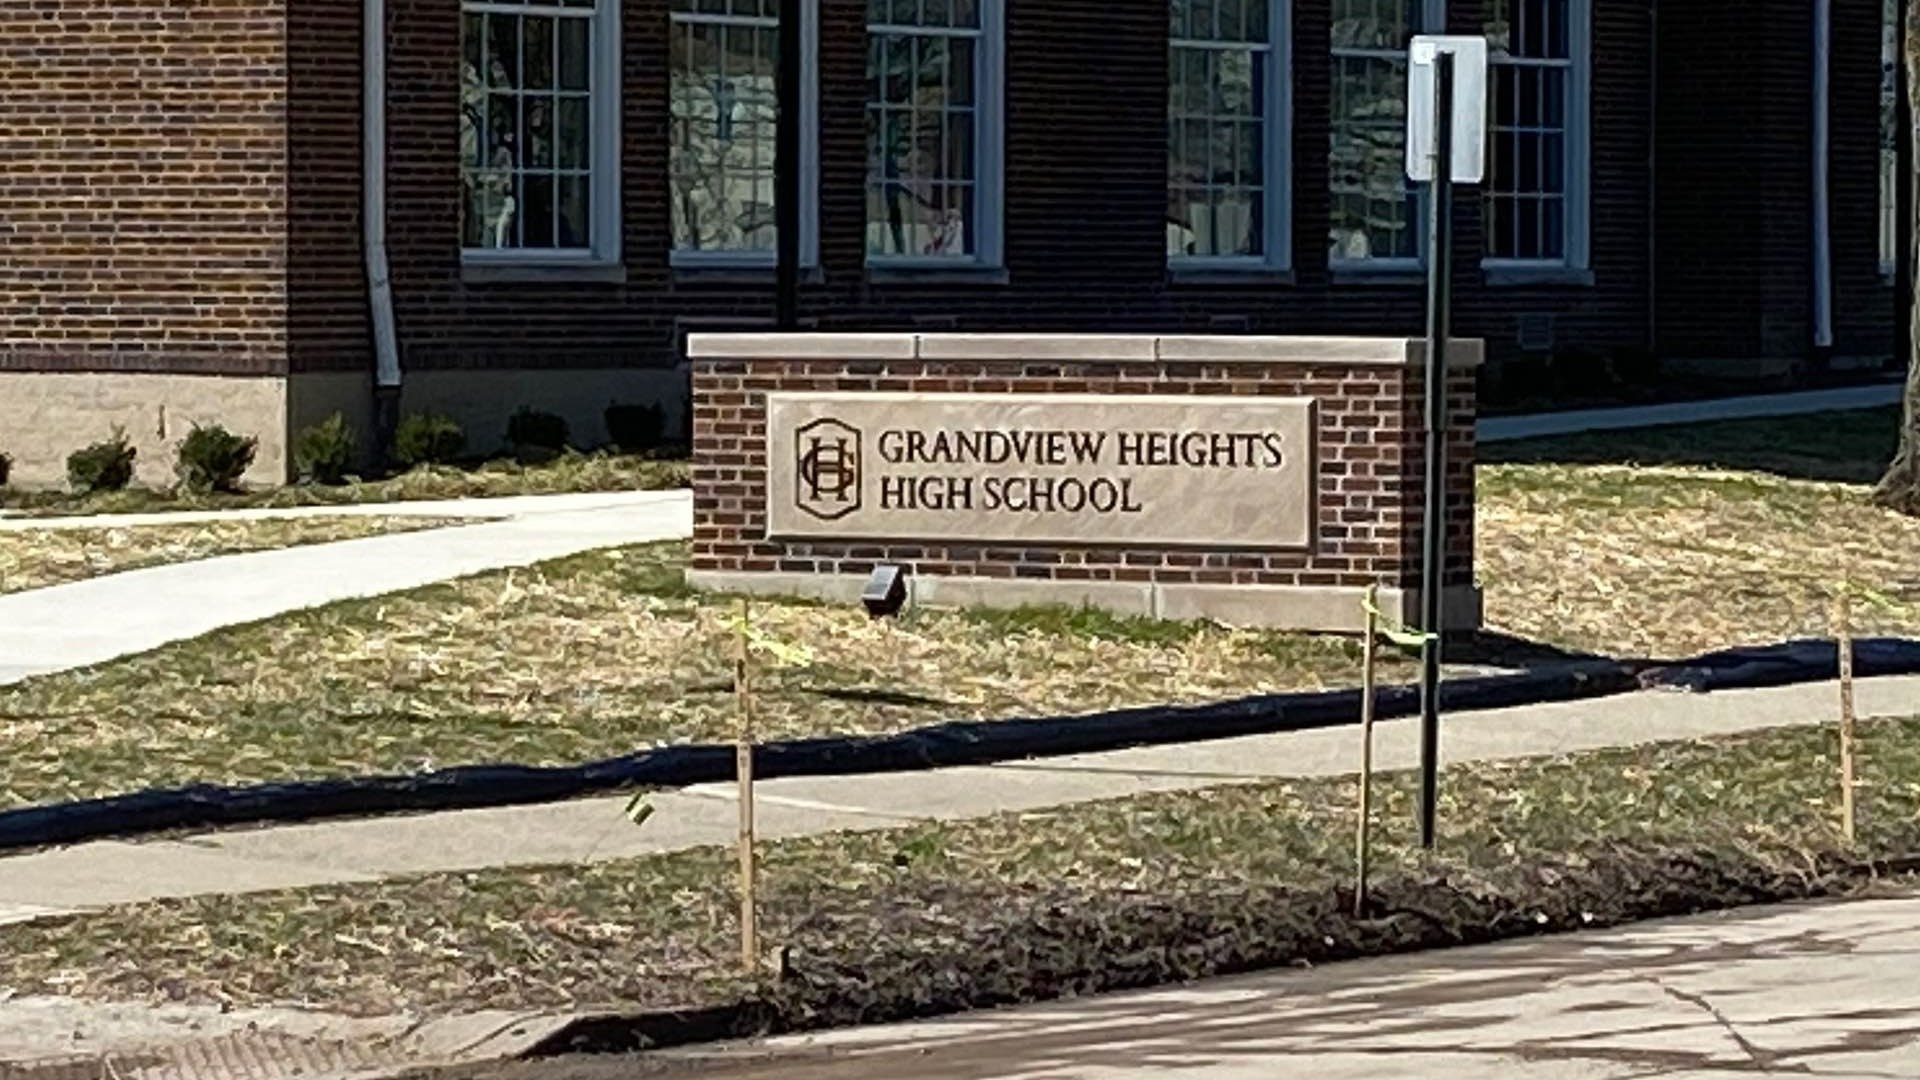 Grandview Heights High School received an anonymous threat around 10:15 a.m. Monday.